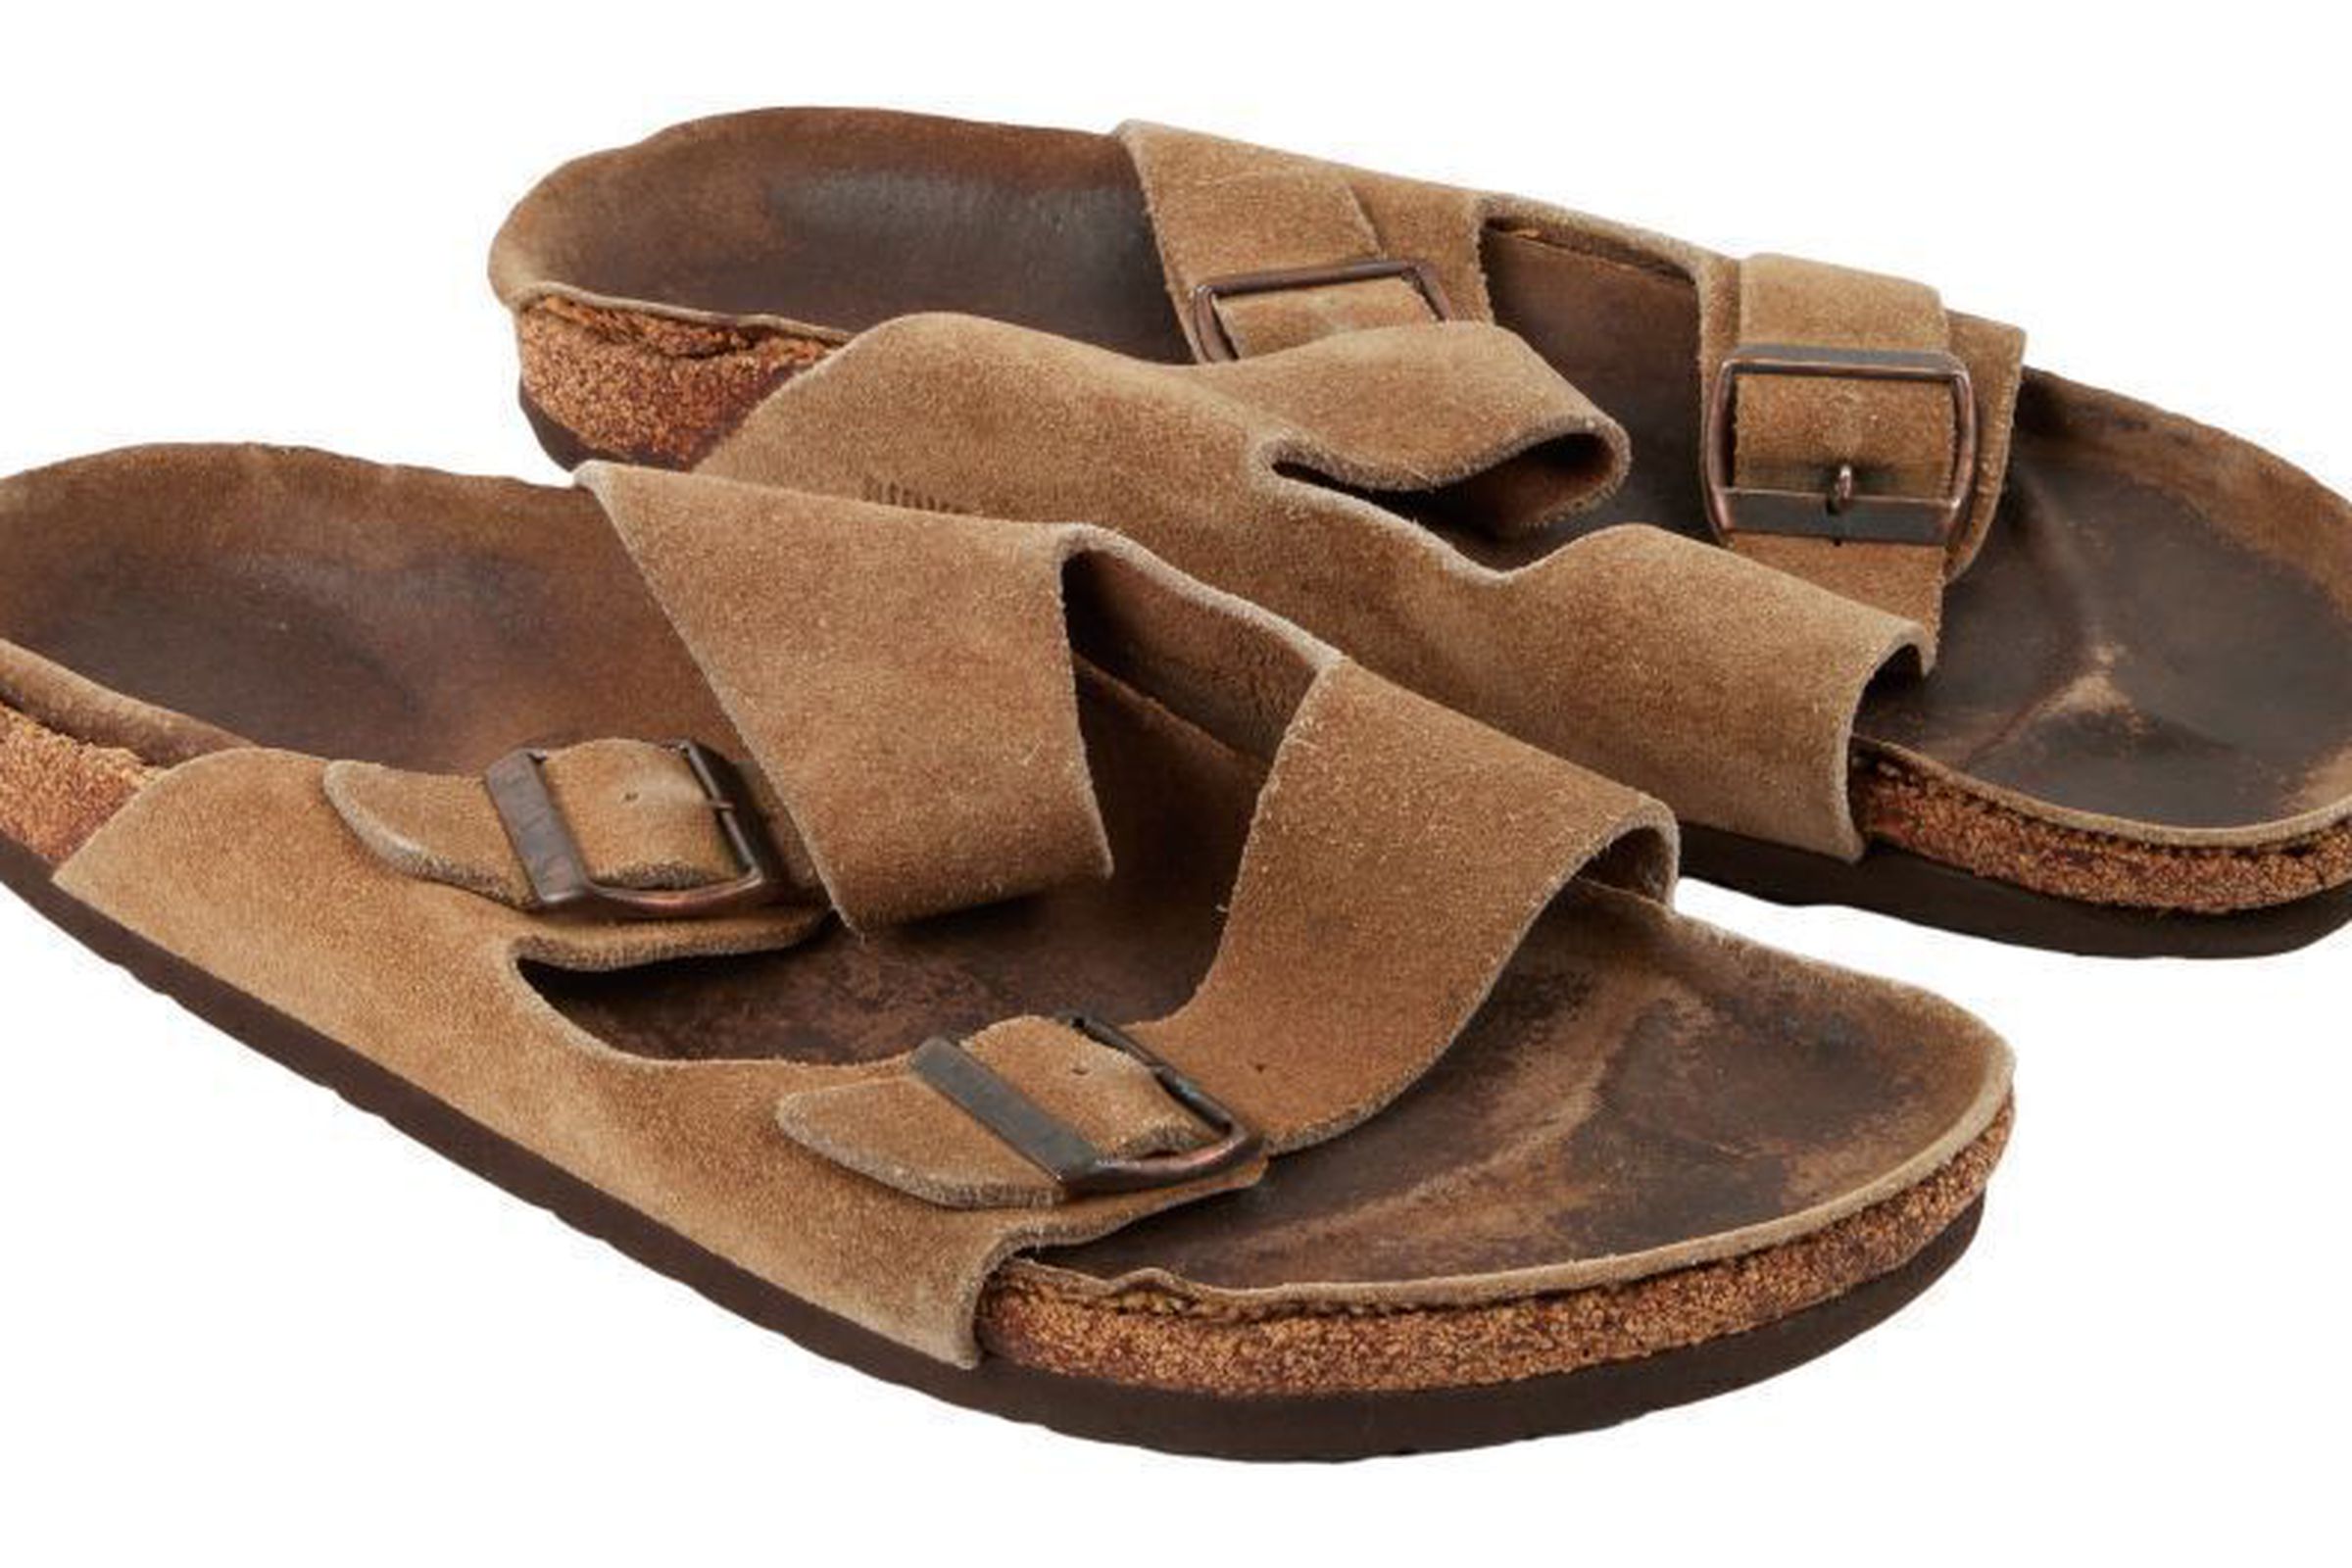 A pair of worn-out Birkenstock sandals